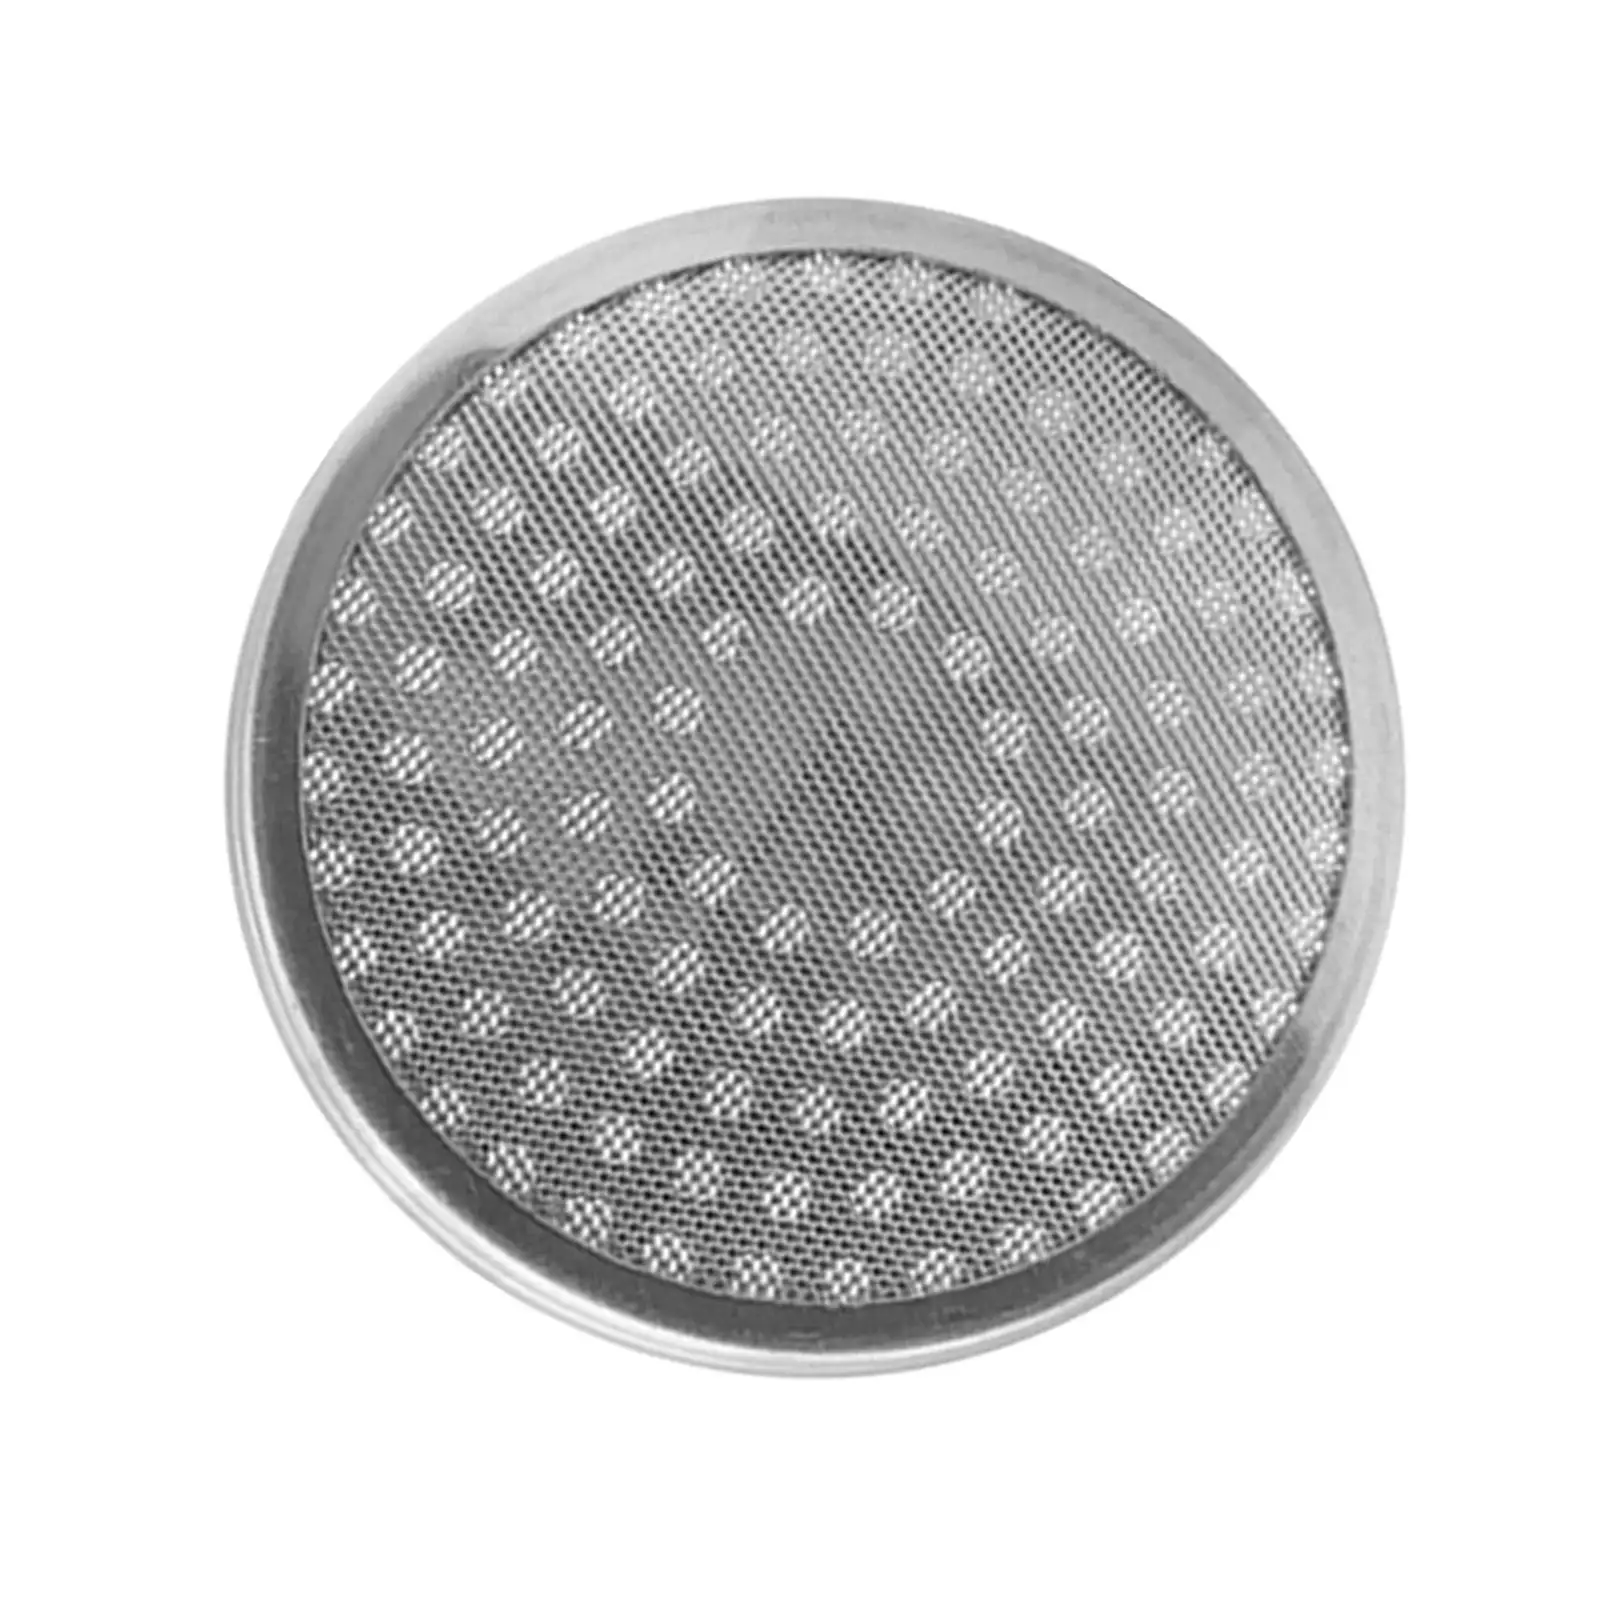 group Head Shower Screen Filter Barista Reusable 304 Stainless Steel for Espresso machine Maker Accessory Parts